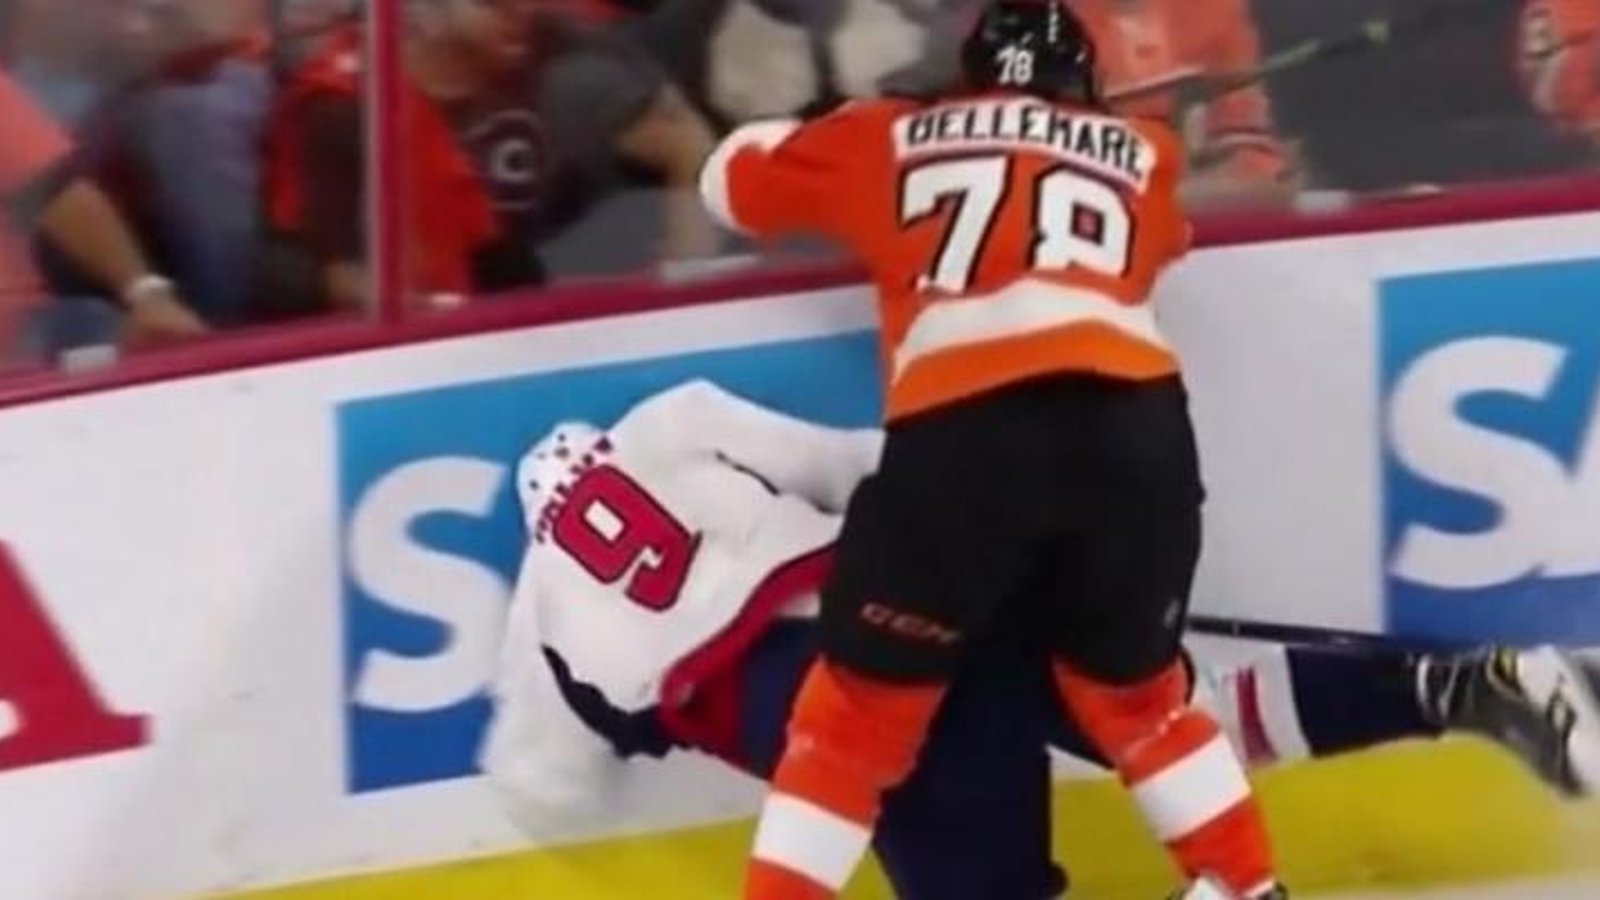 Report: Bellemare will have hearing after very dangerous hit last night.